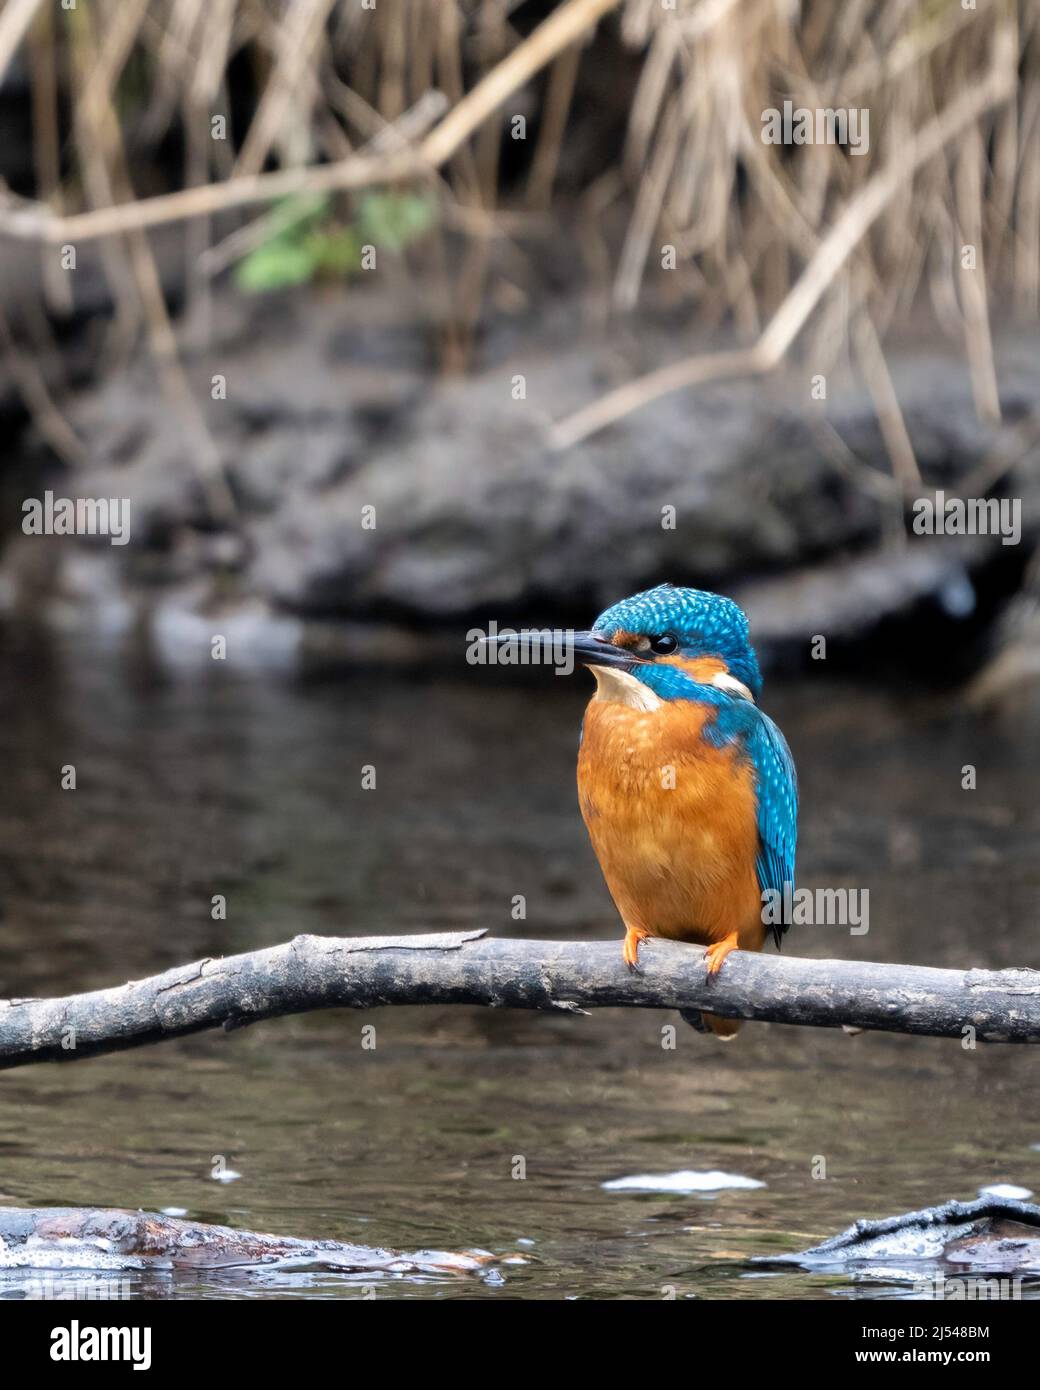 Kingfisher Perched Stock Photo